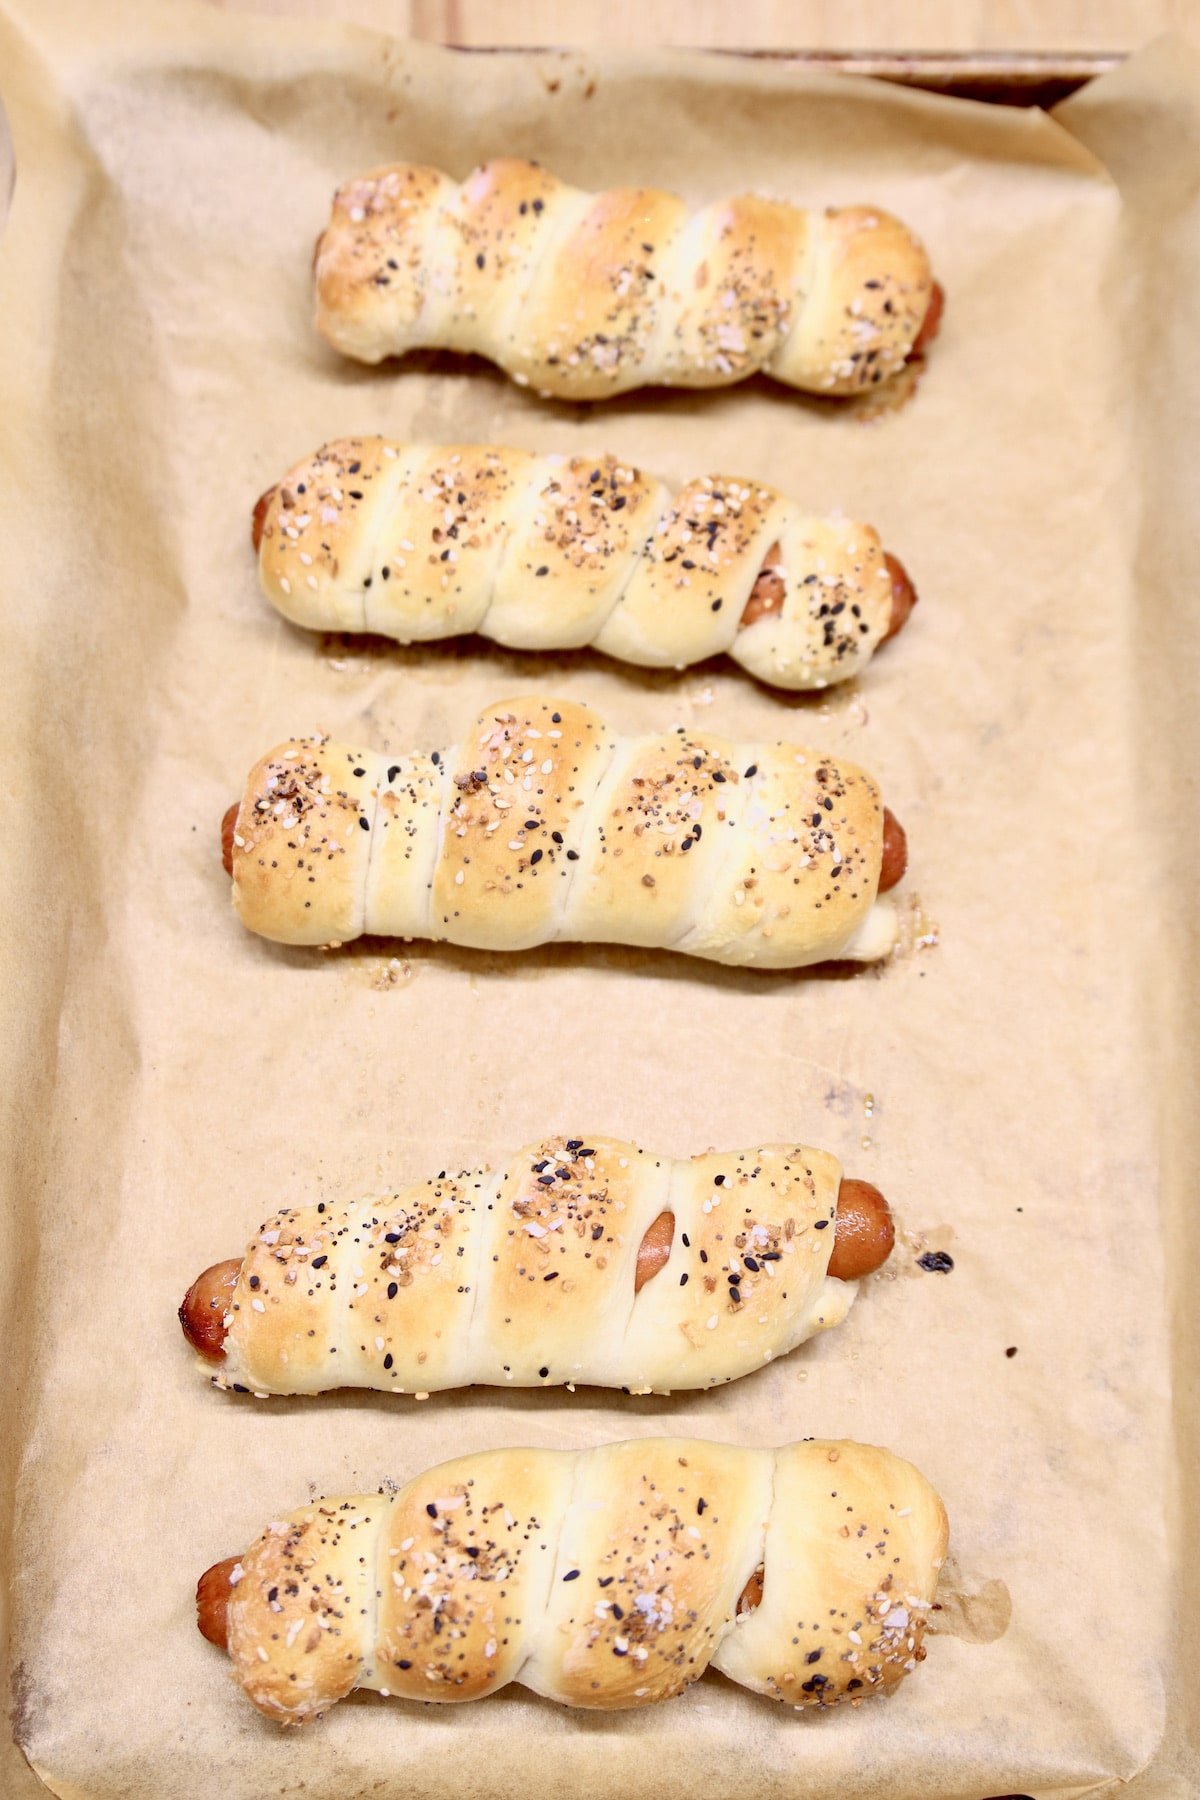 5 baked pretzel dogs on a parchment lined baking sheet.